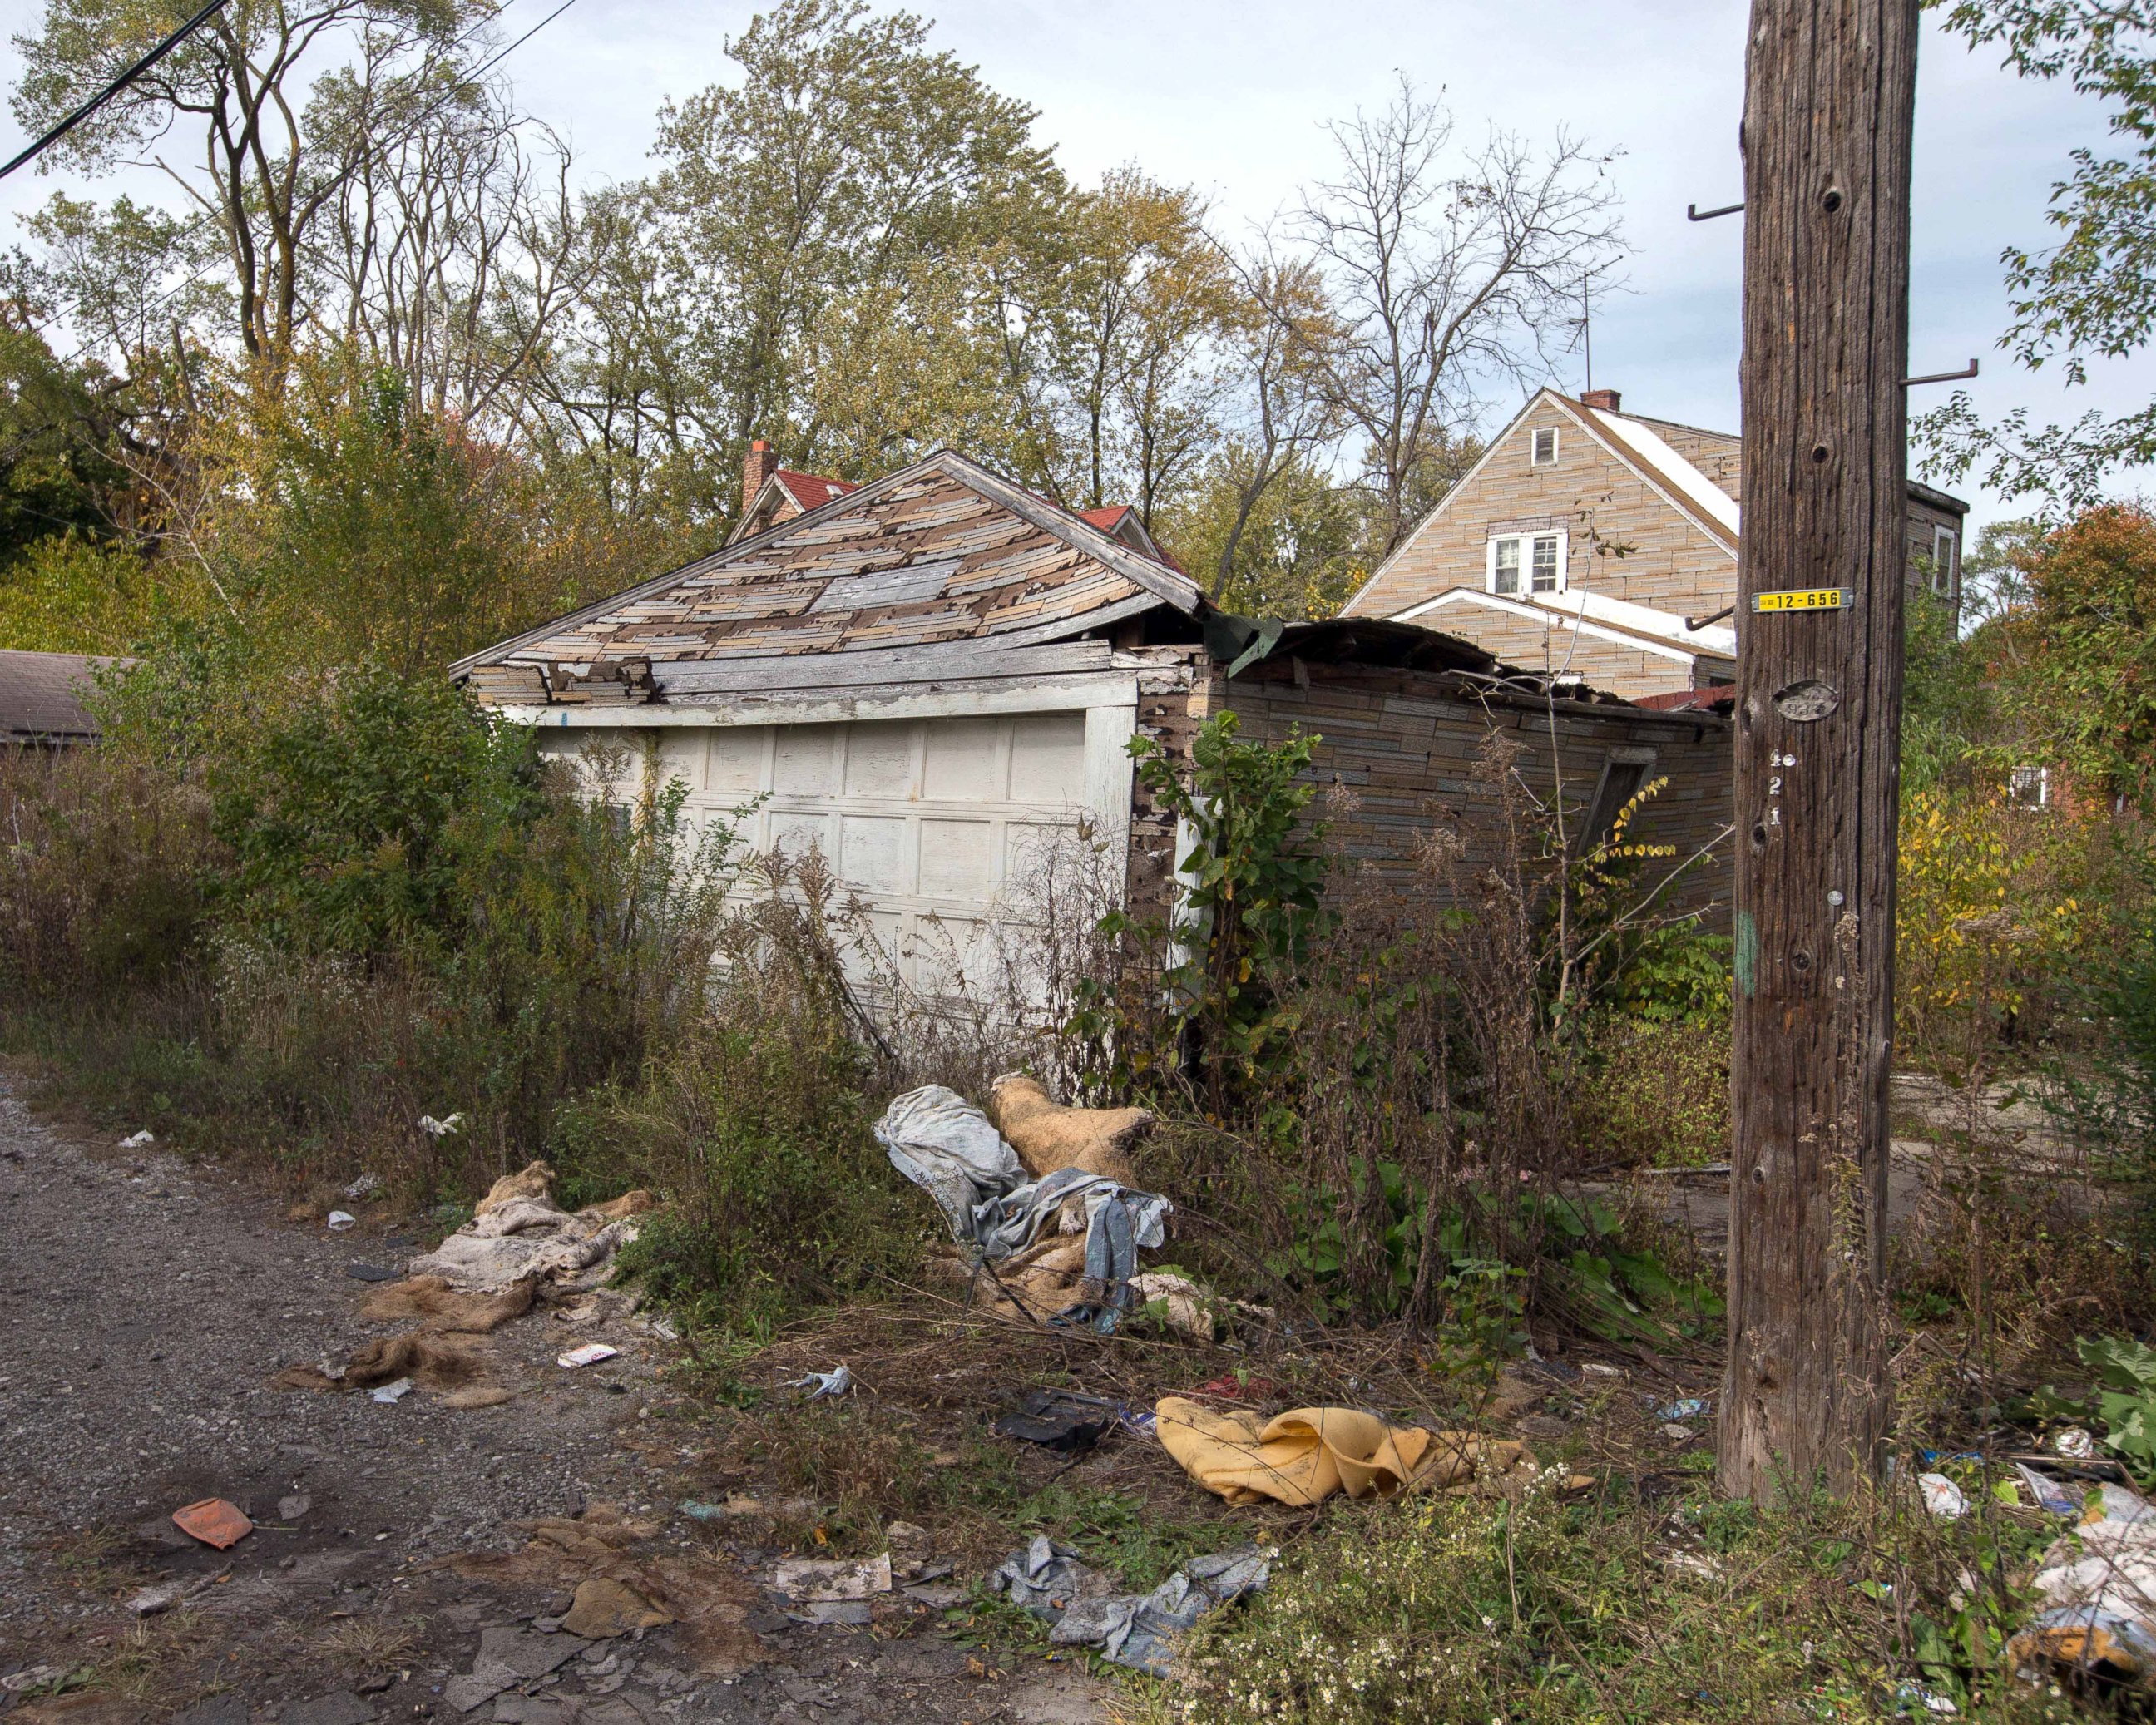 PHOTO: The back of a house in Gary, Ind., where the body of a woman was found, Oct. 19, 2014.